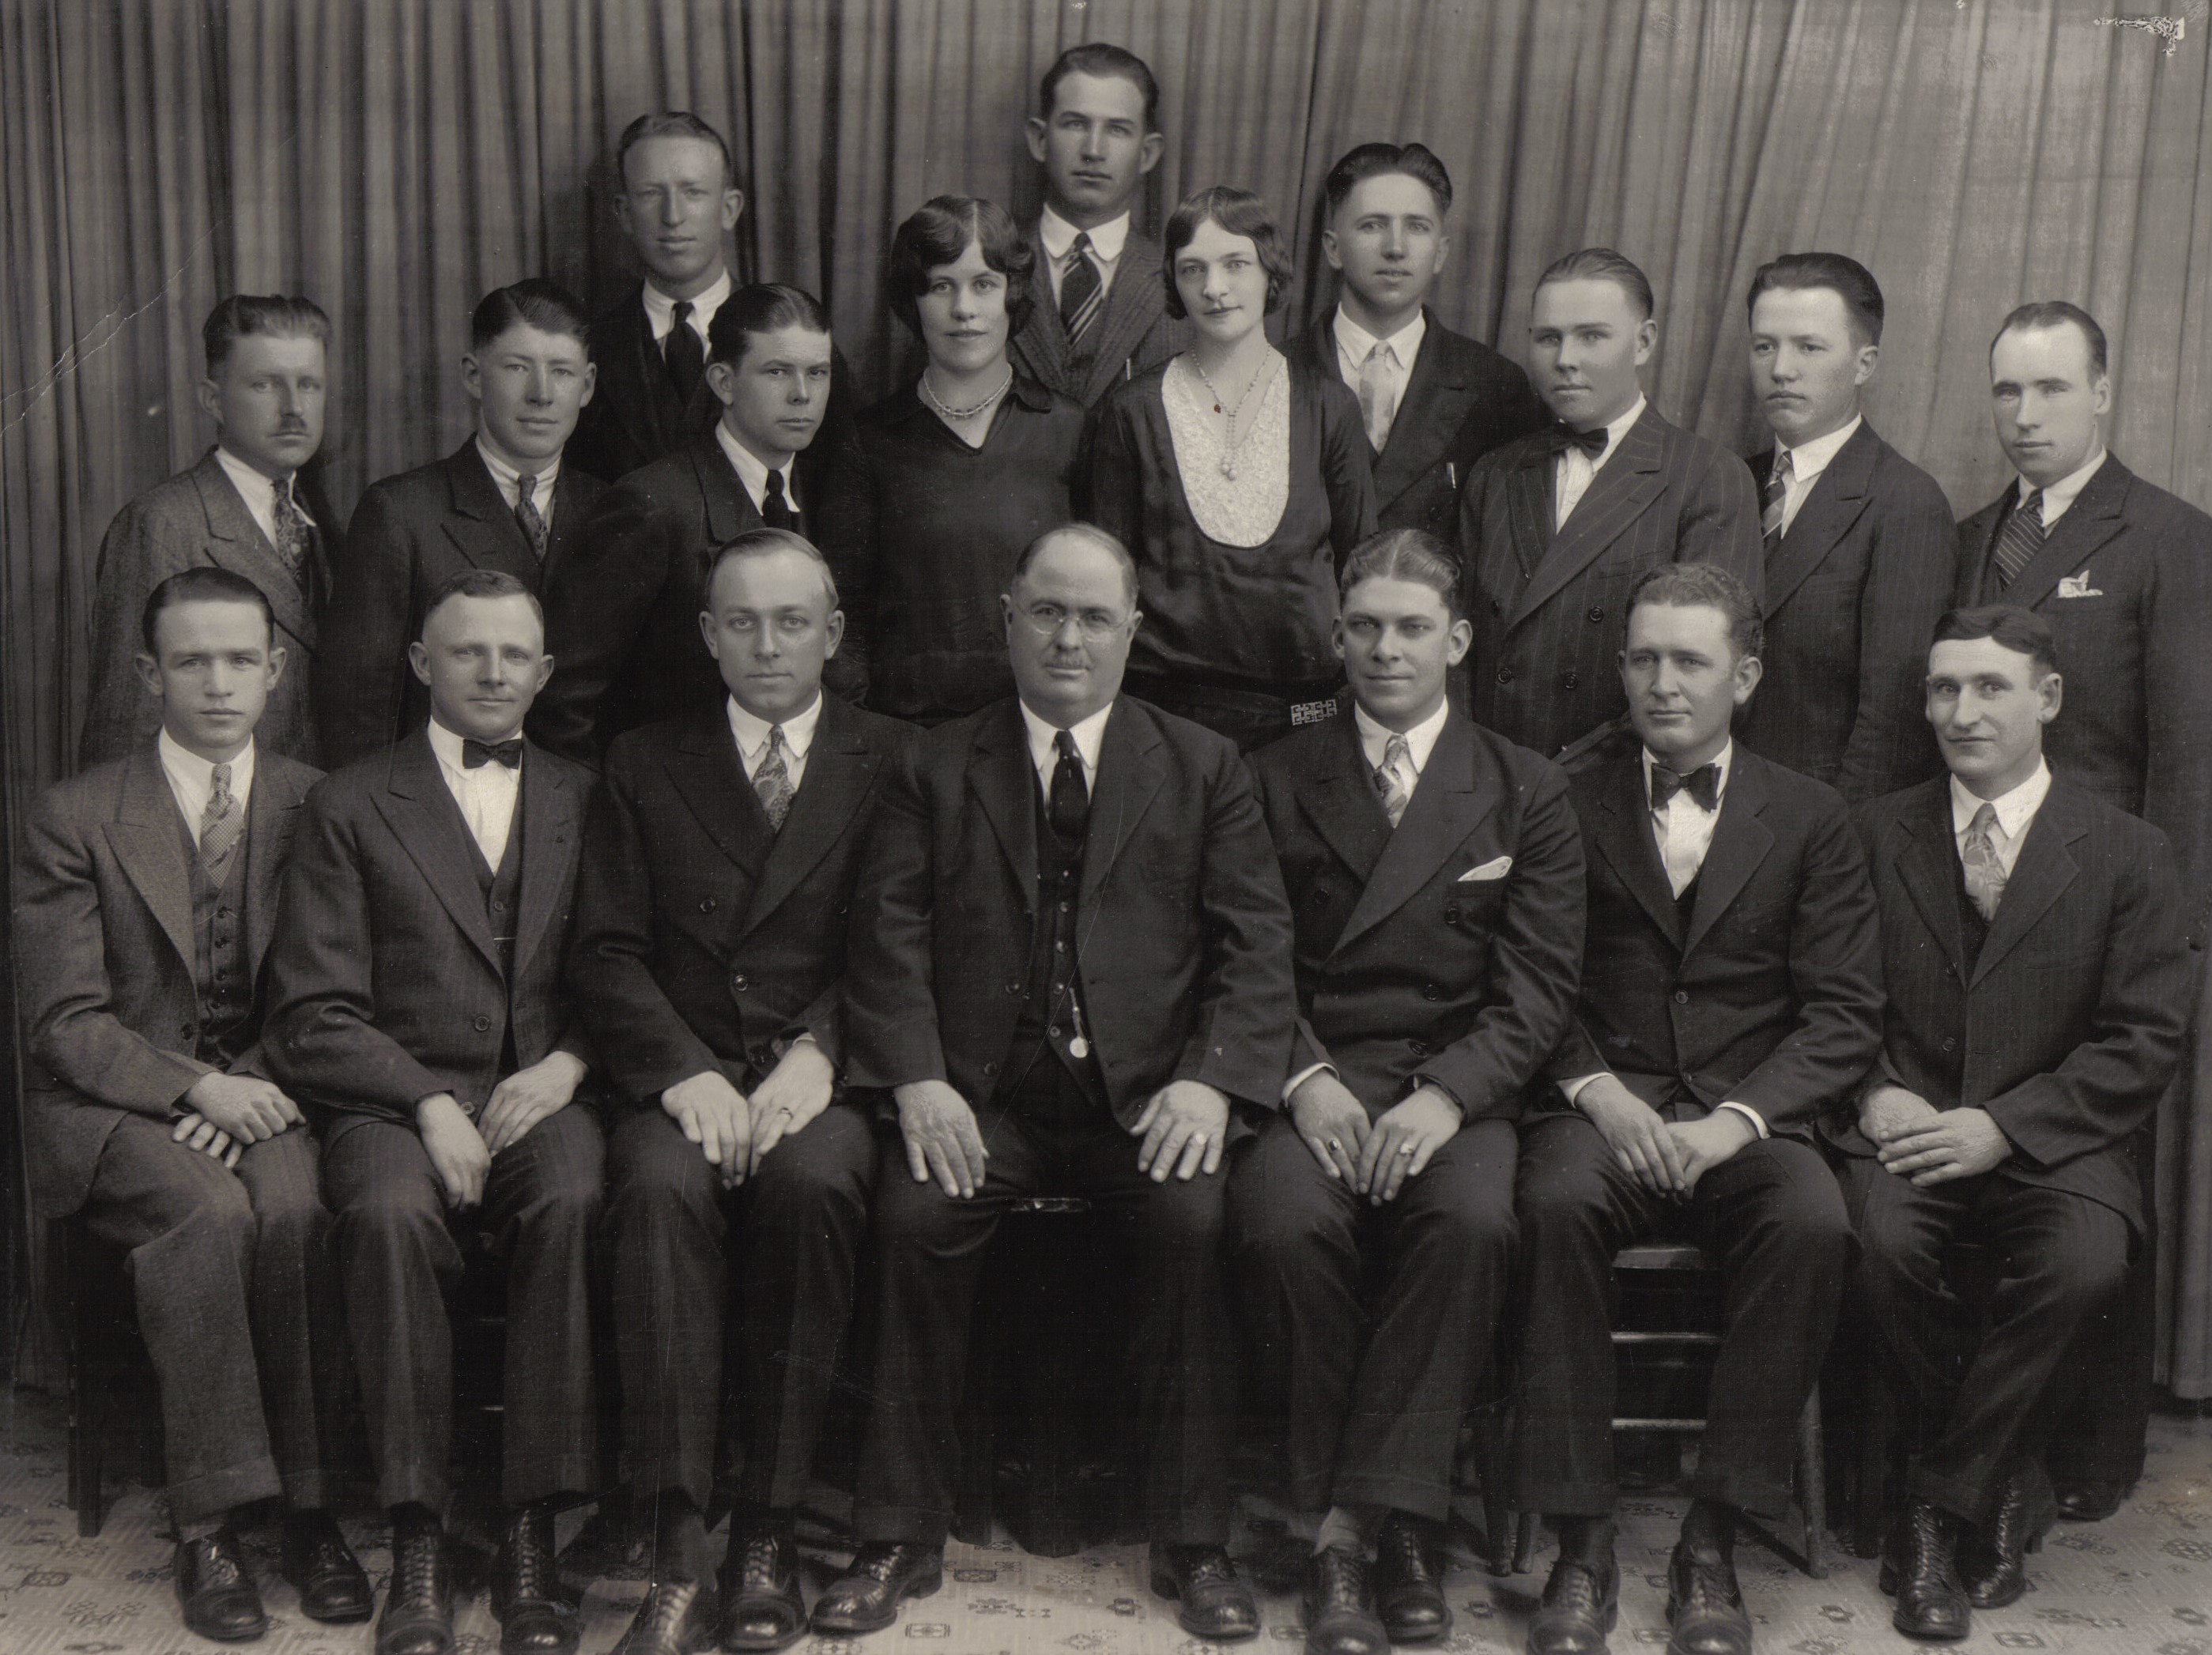 Central States Mission ca 1928